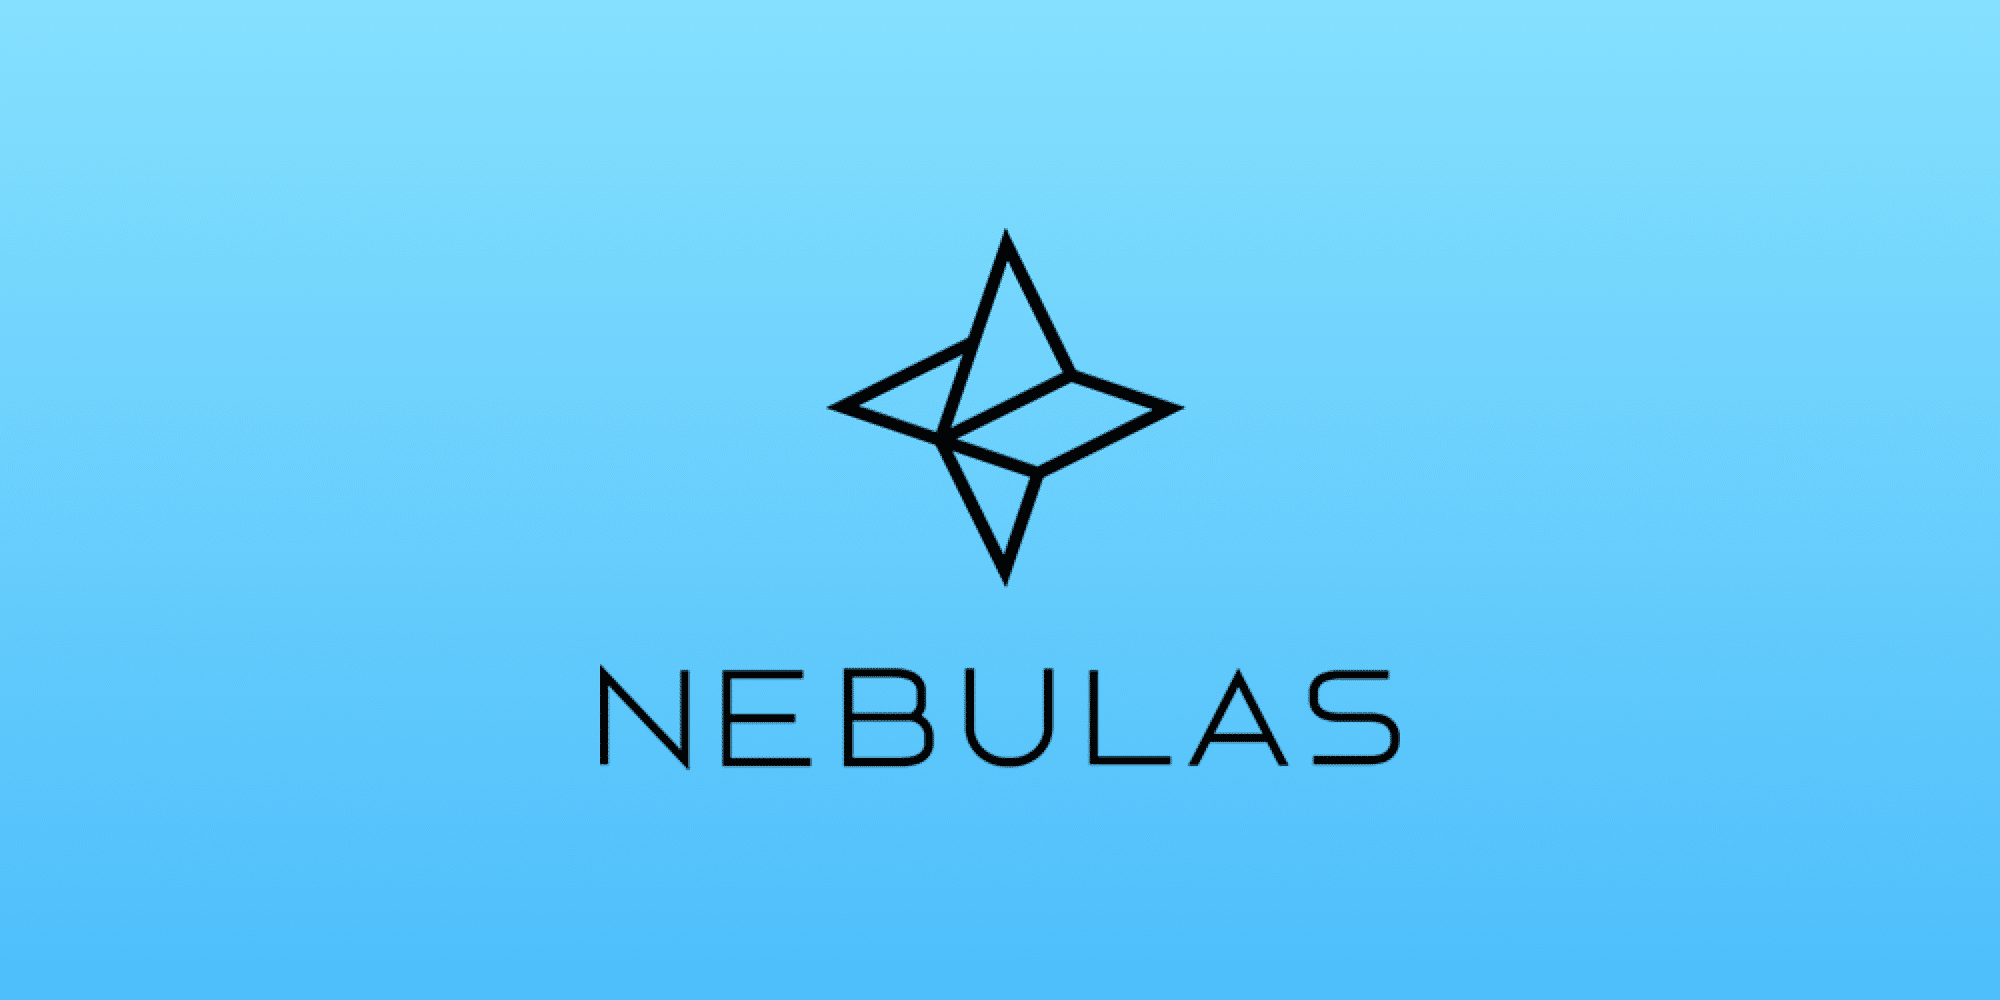 Is Nebulas (NAS) a good buy right now or should you wait for another dip? - CaptainAltcoin